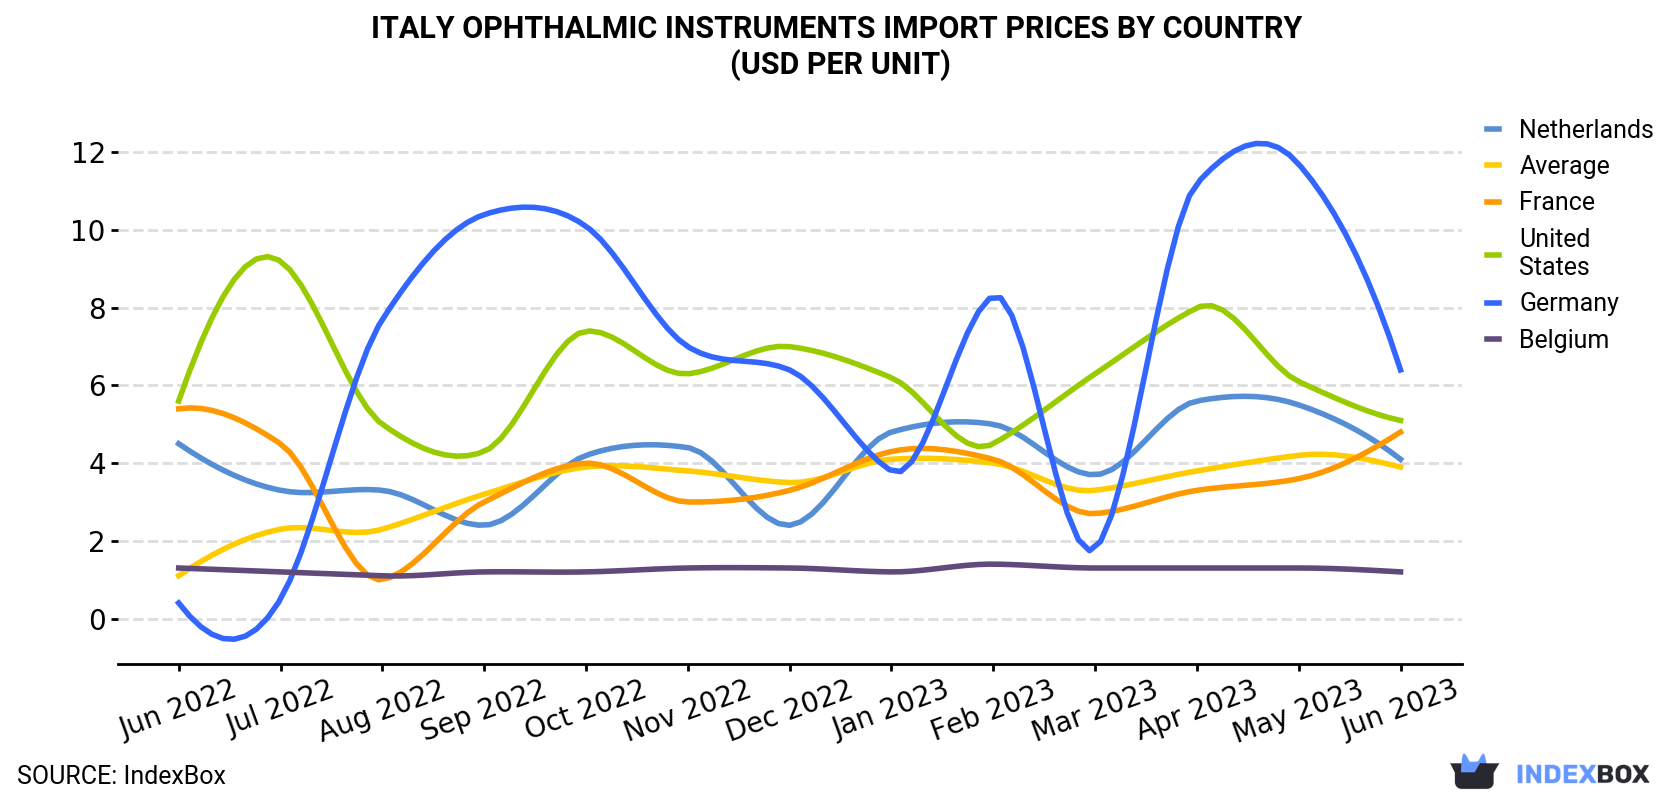 Italy Ophthalmic Instruments Import Prices By Country (USD Per Unit)